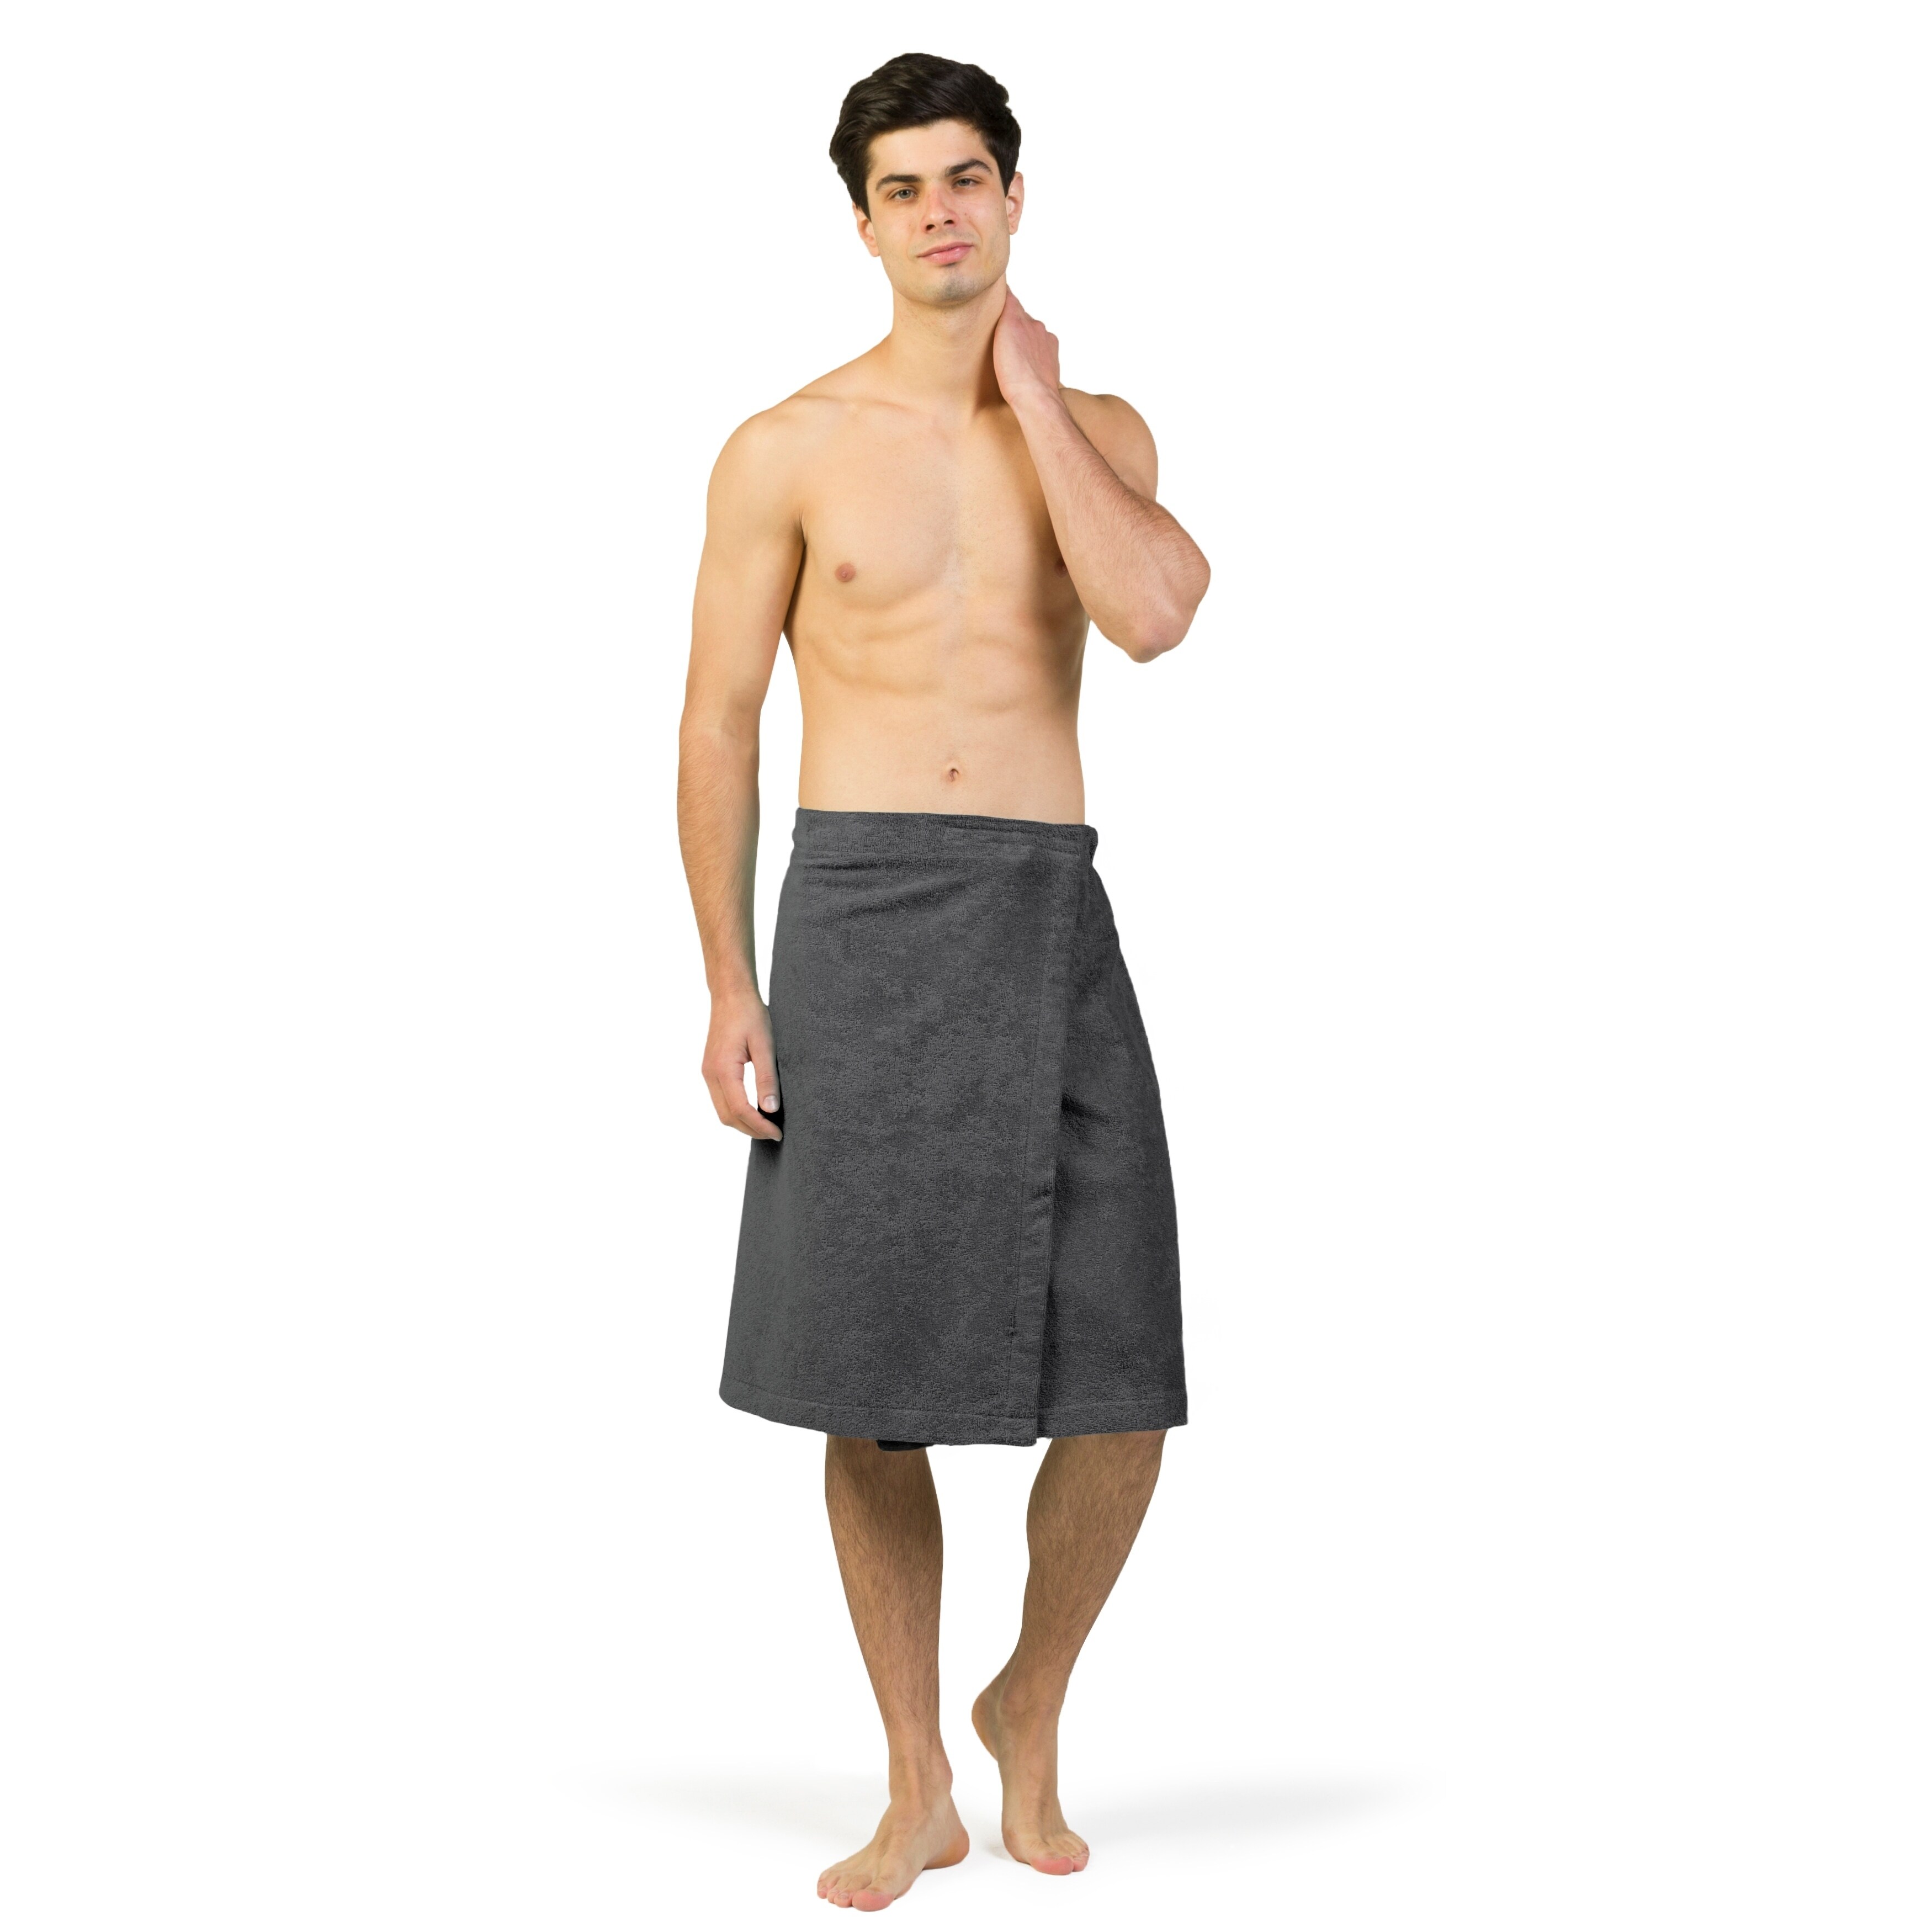 https://ak1.ostkcdn.com/images/products/28303229/Authentic-Turkish-Cotton-Terry-Grey-Spa-and-Shower-Towel-Wrap-7dcb4f53-b931-49aa-8f8e-c60f51f241ce.jpg